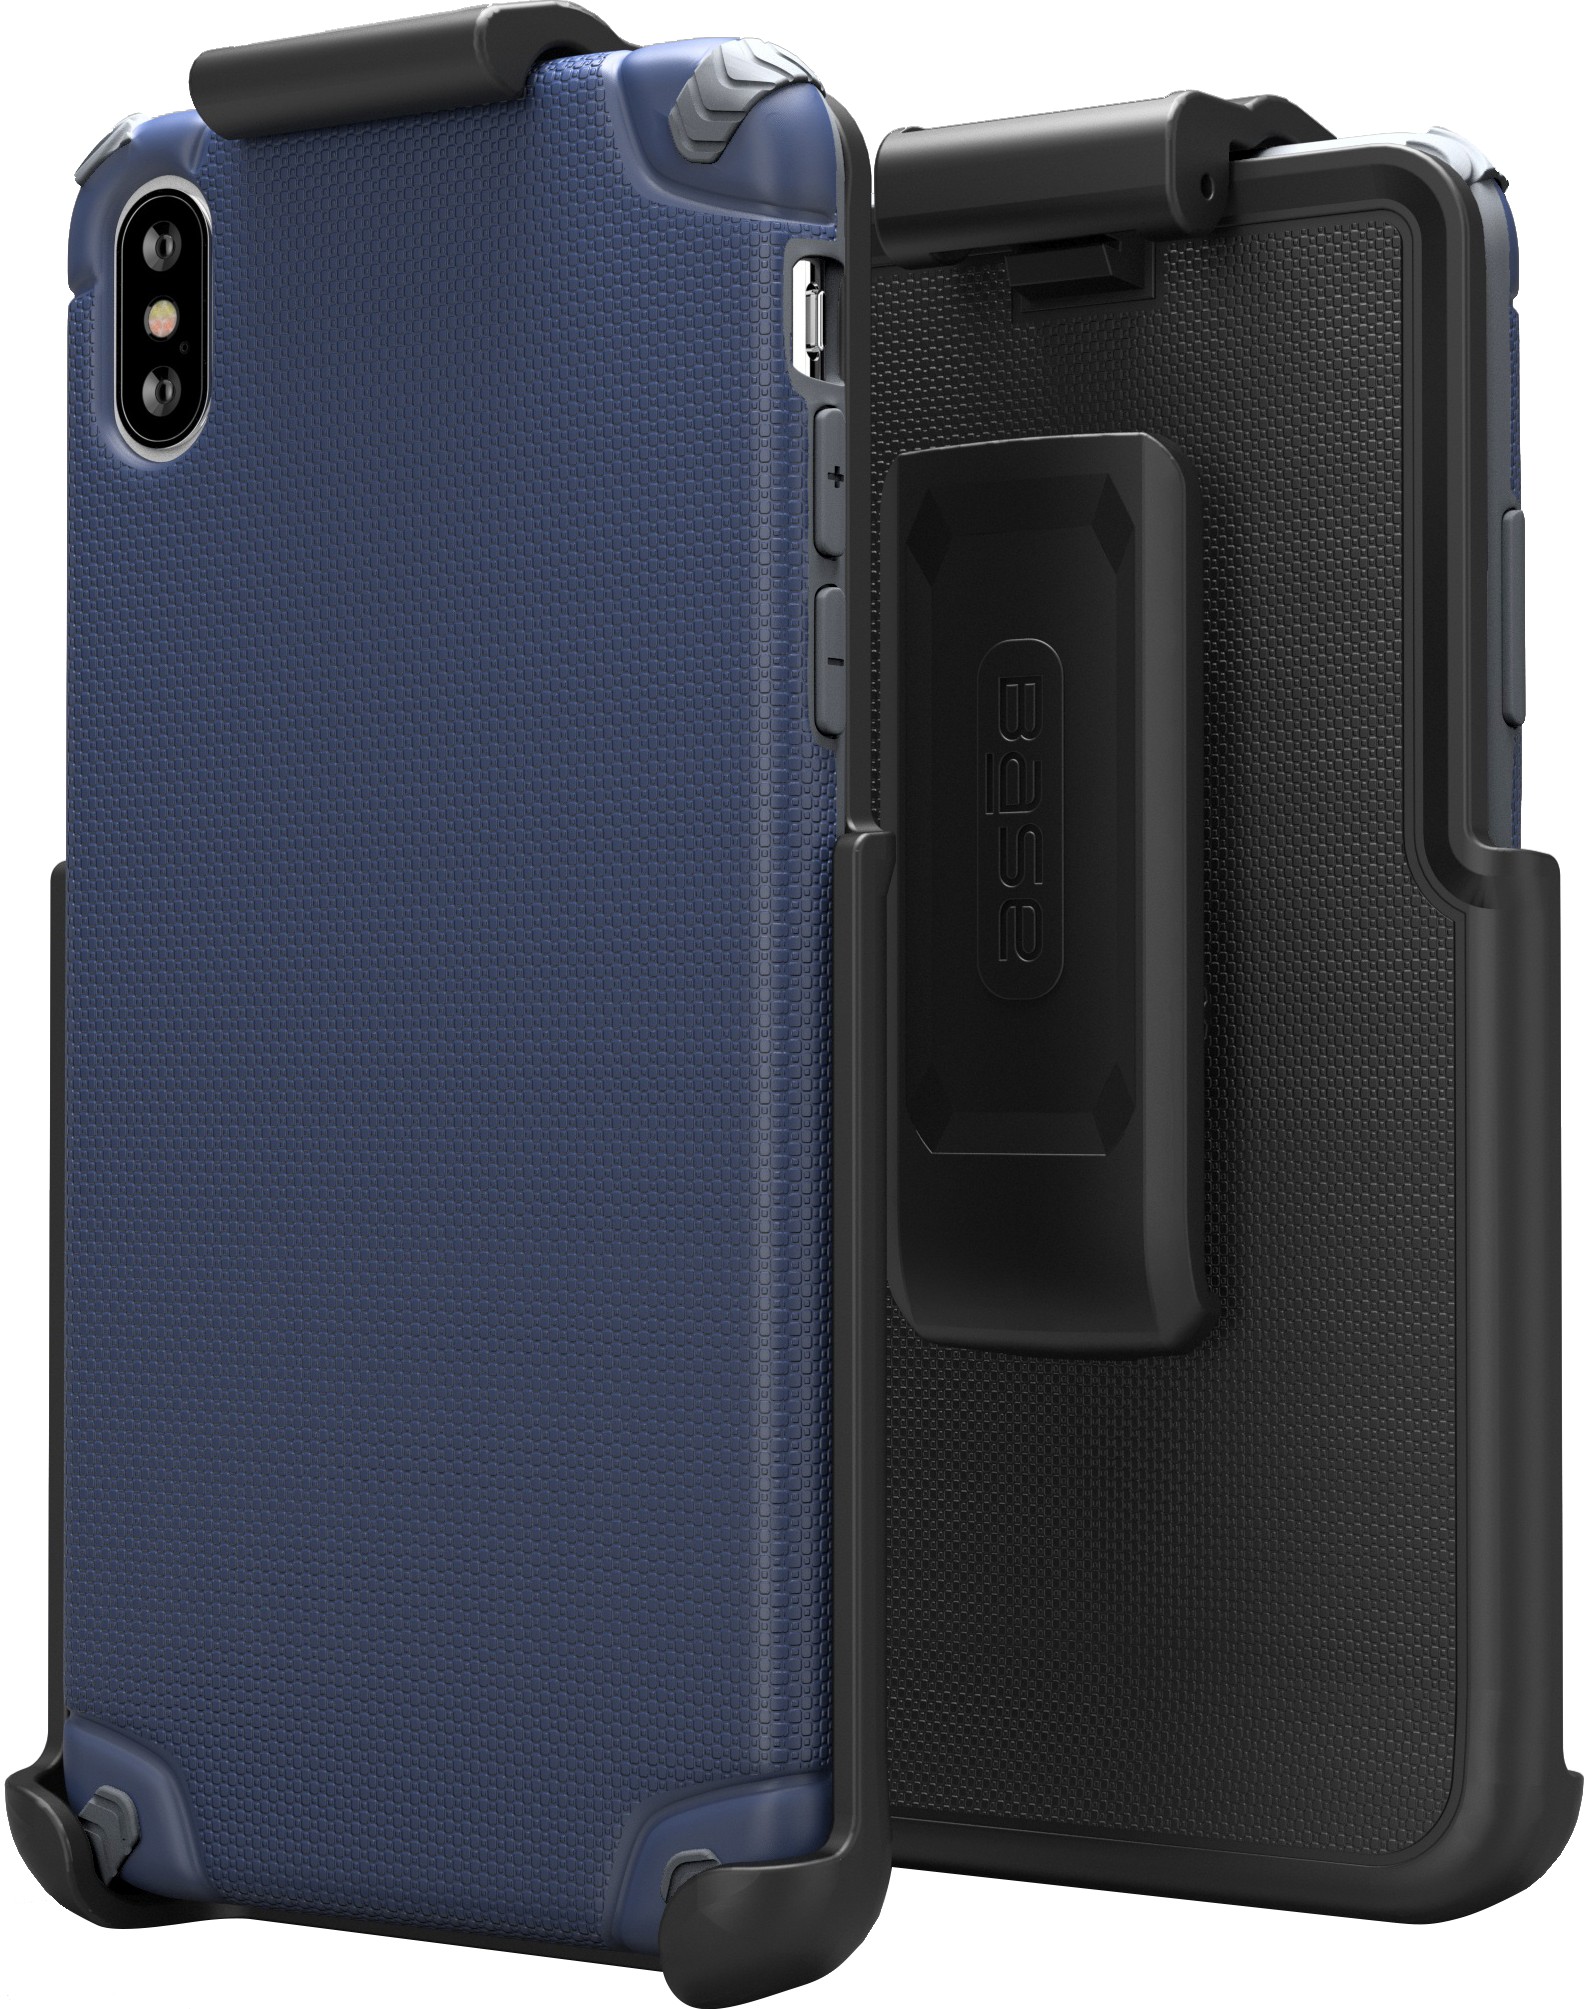 BASE Rugged Armor PRO TECH Protective Case With Holster for iPhone XS Max - Blue